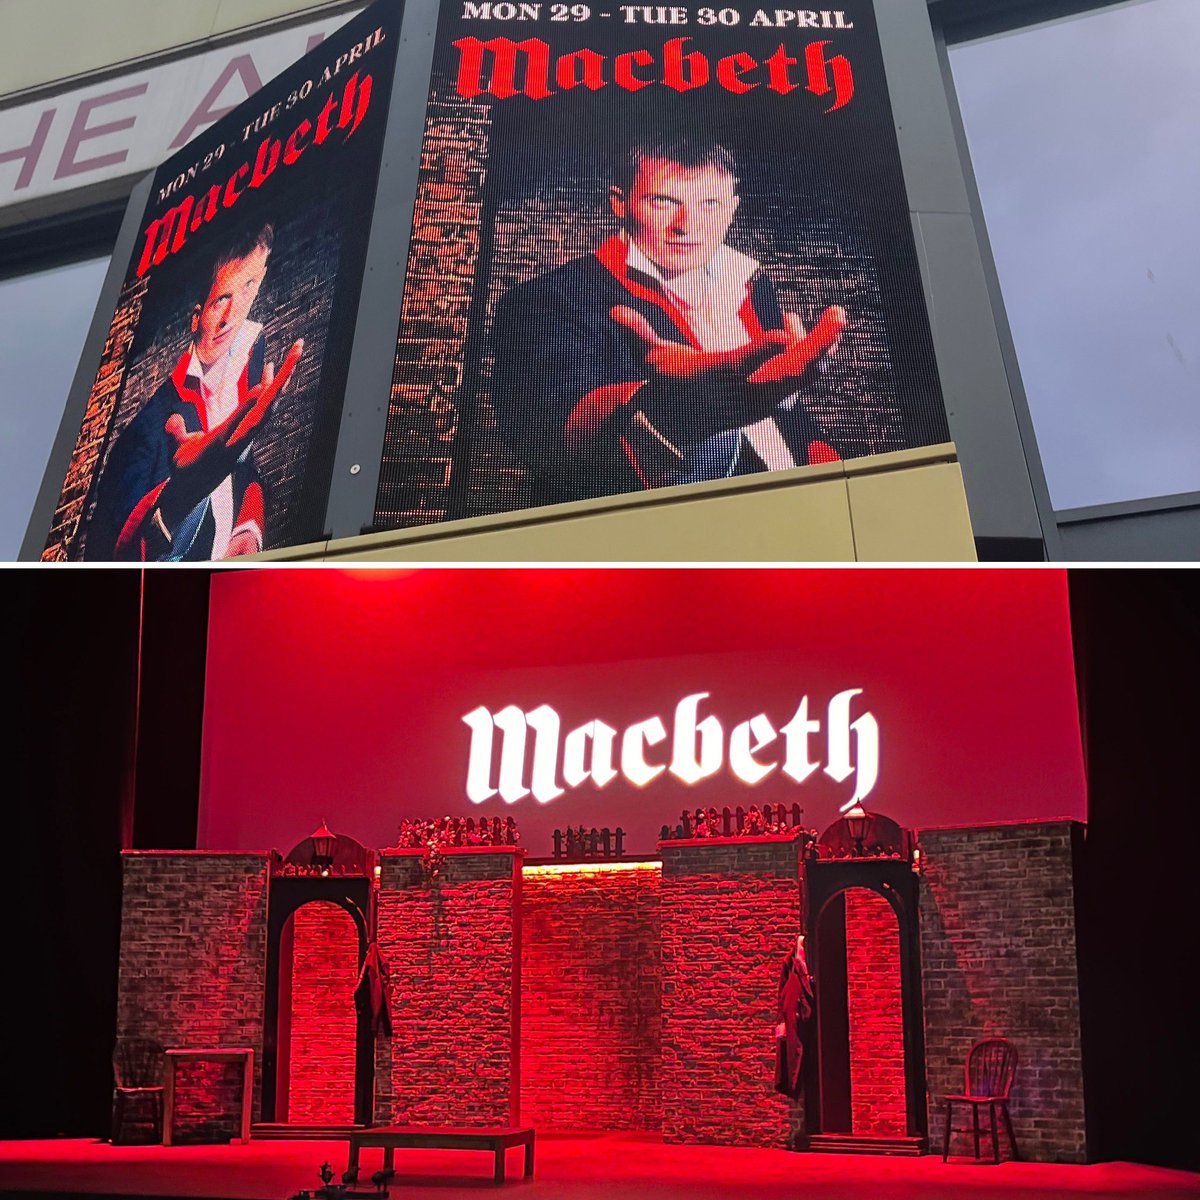 Our Year 11 students enjoyed a fantastic evening @thealexbham watching Macbeth and engaging in some brilliant revision ahead of their final exams! Thank you to our staff for providing our students with another extra-curricular opportunity #transforminglives #livetheatre